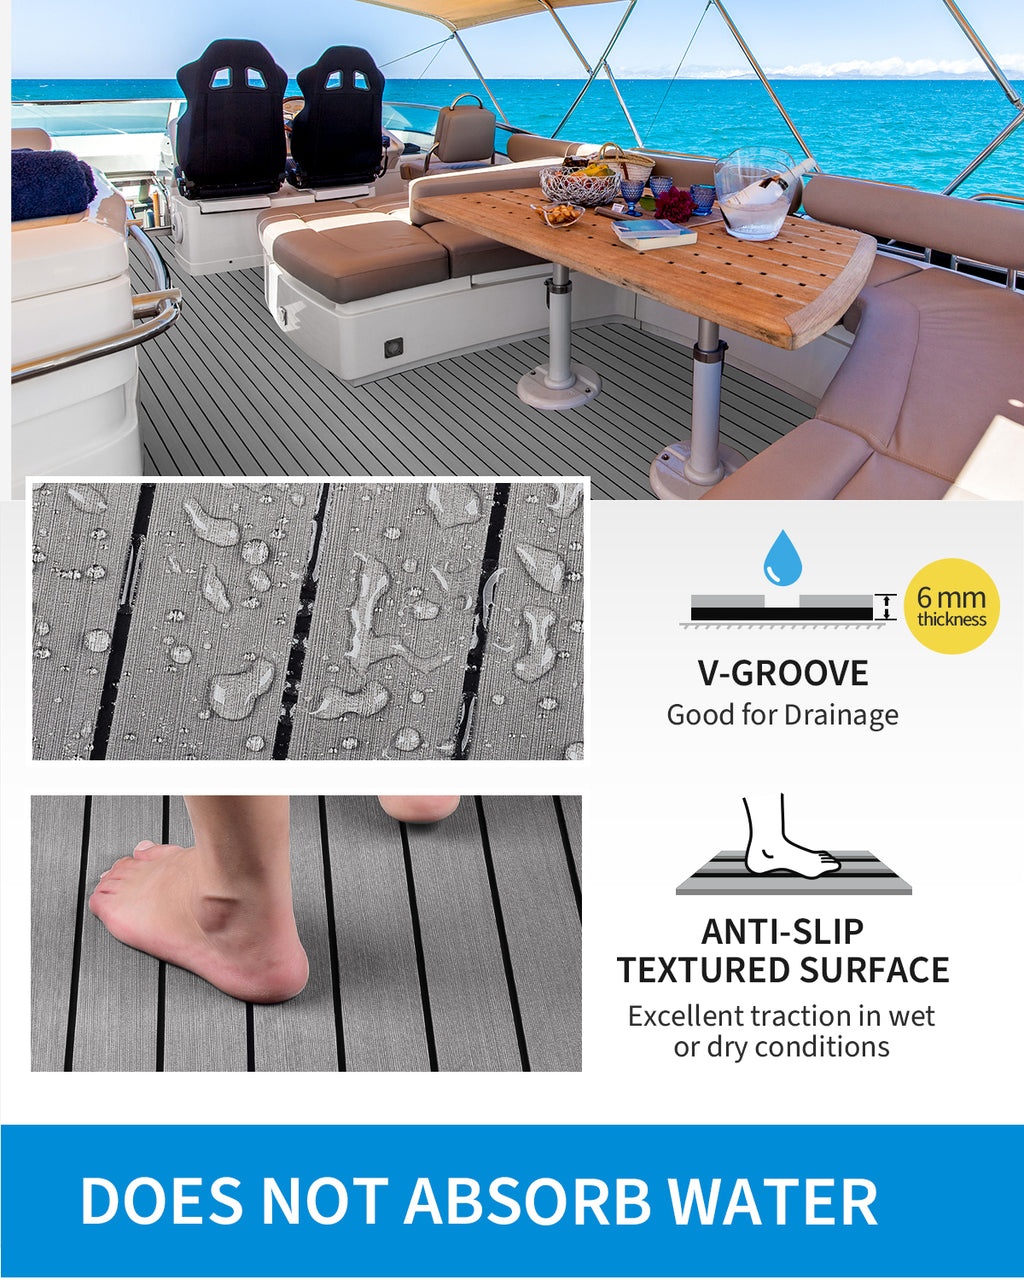 OCEANBROAD Boat Flooring with 3M 99786+ Adhesive Backing EVA Foam Self-Adhesive 92''x45.6'' Faux Teak Marine Decking Sheet for Jon Boats Yacht RV Floor, Gray with Black Seam Lines